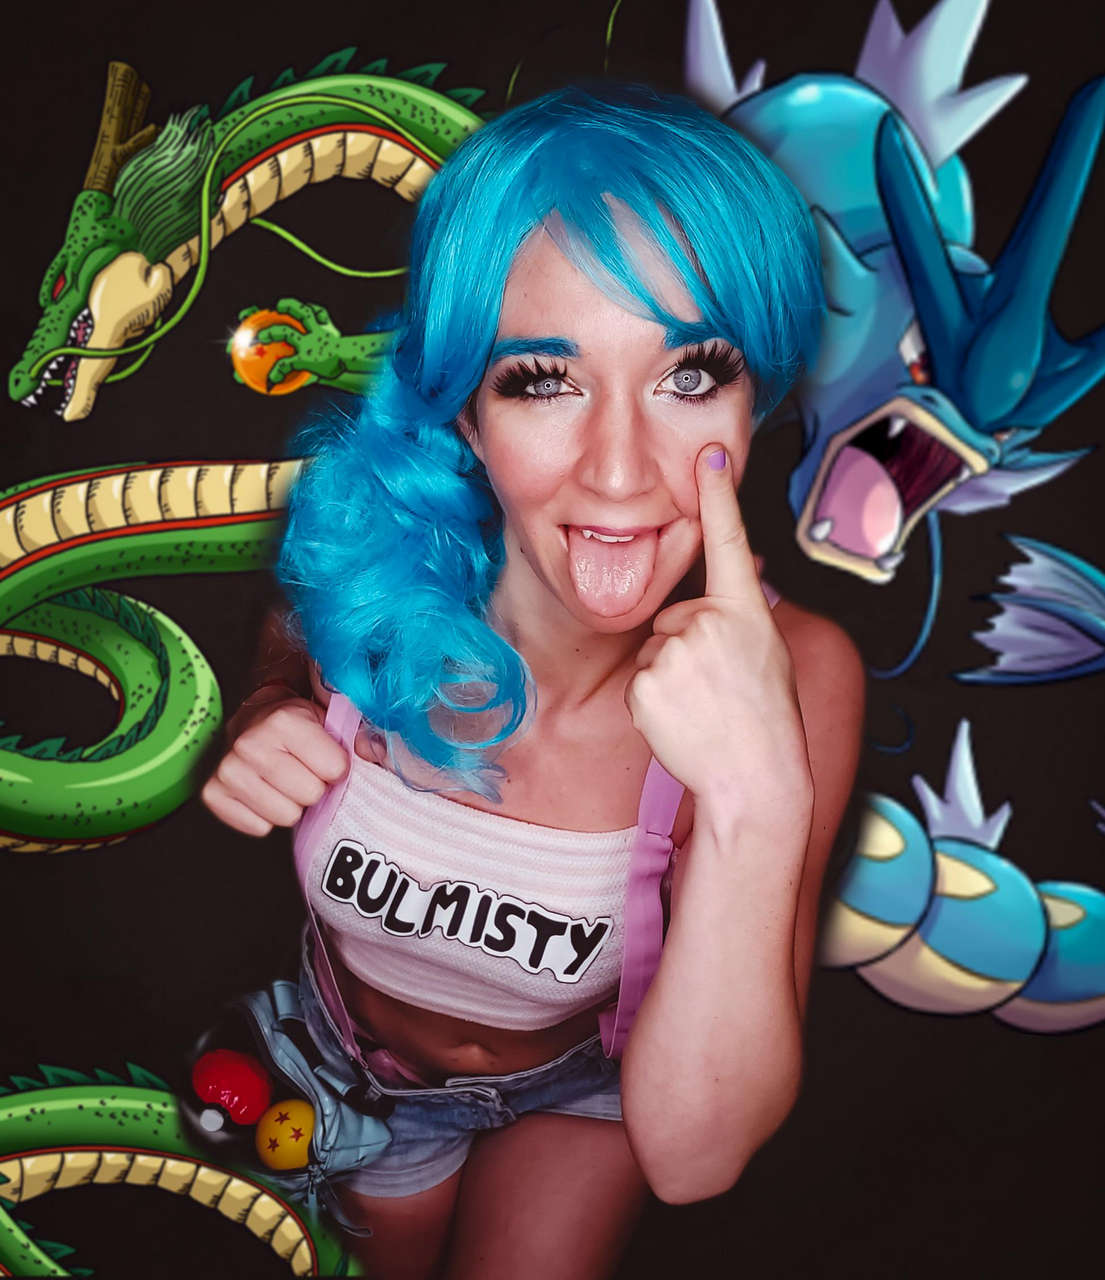 Introducing My New Crossover Cosplay Bulmisty By Vaga Bondage Follow The Links In My Bio To See Mor